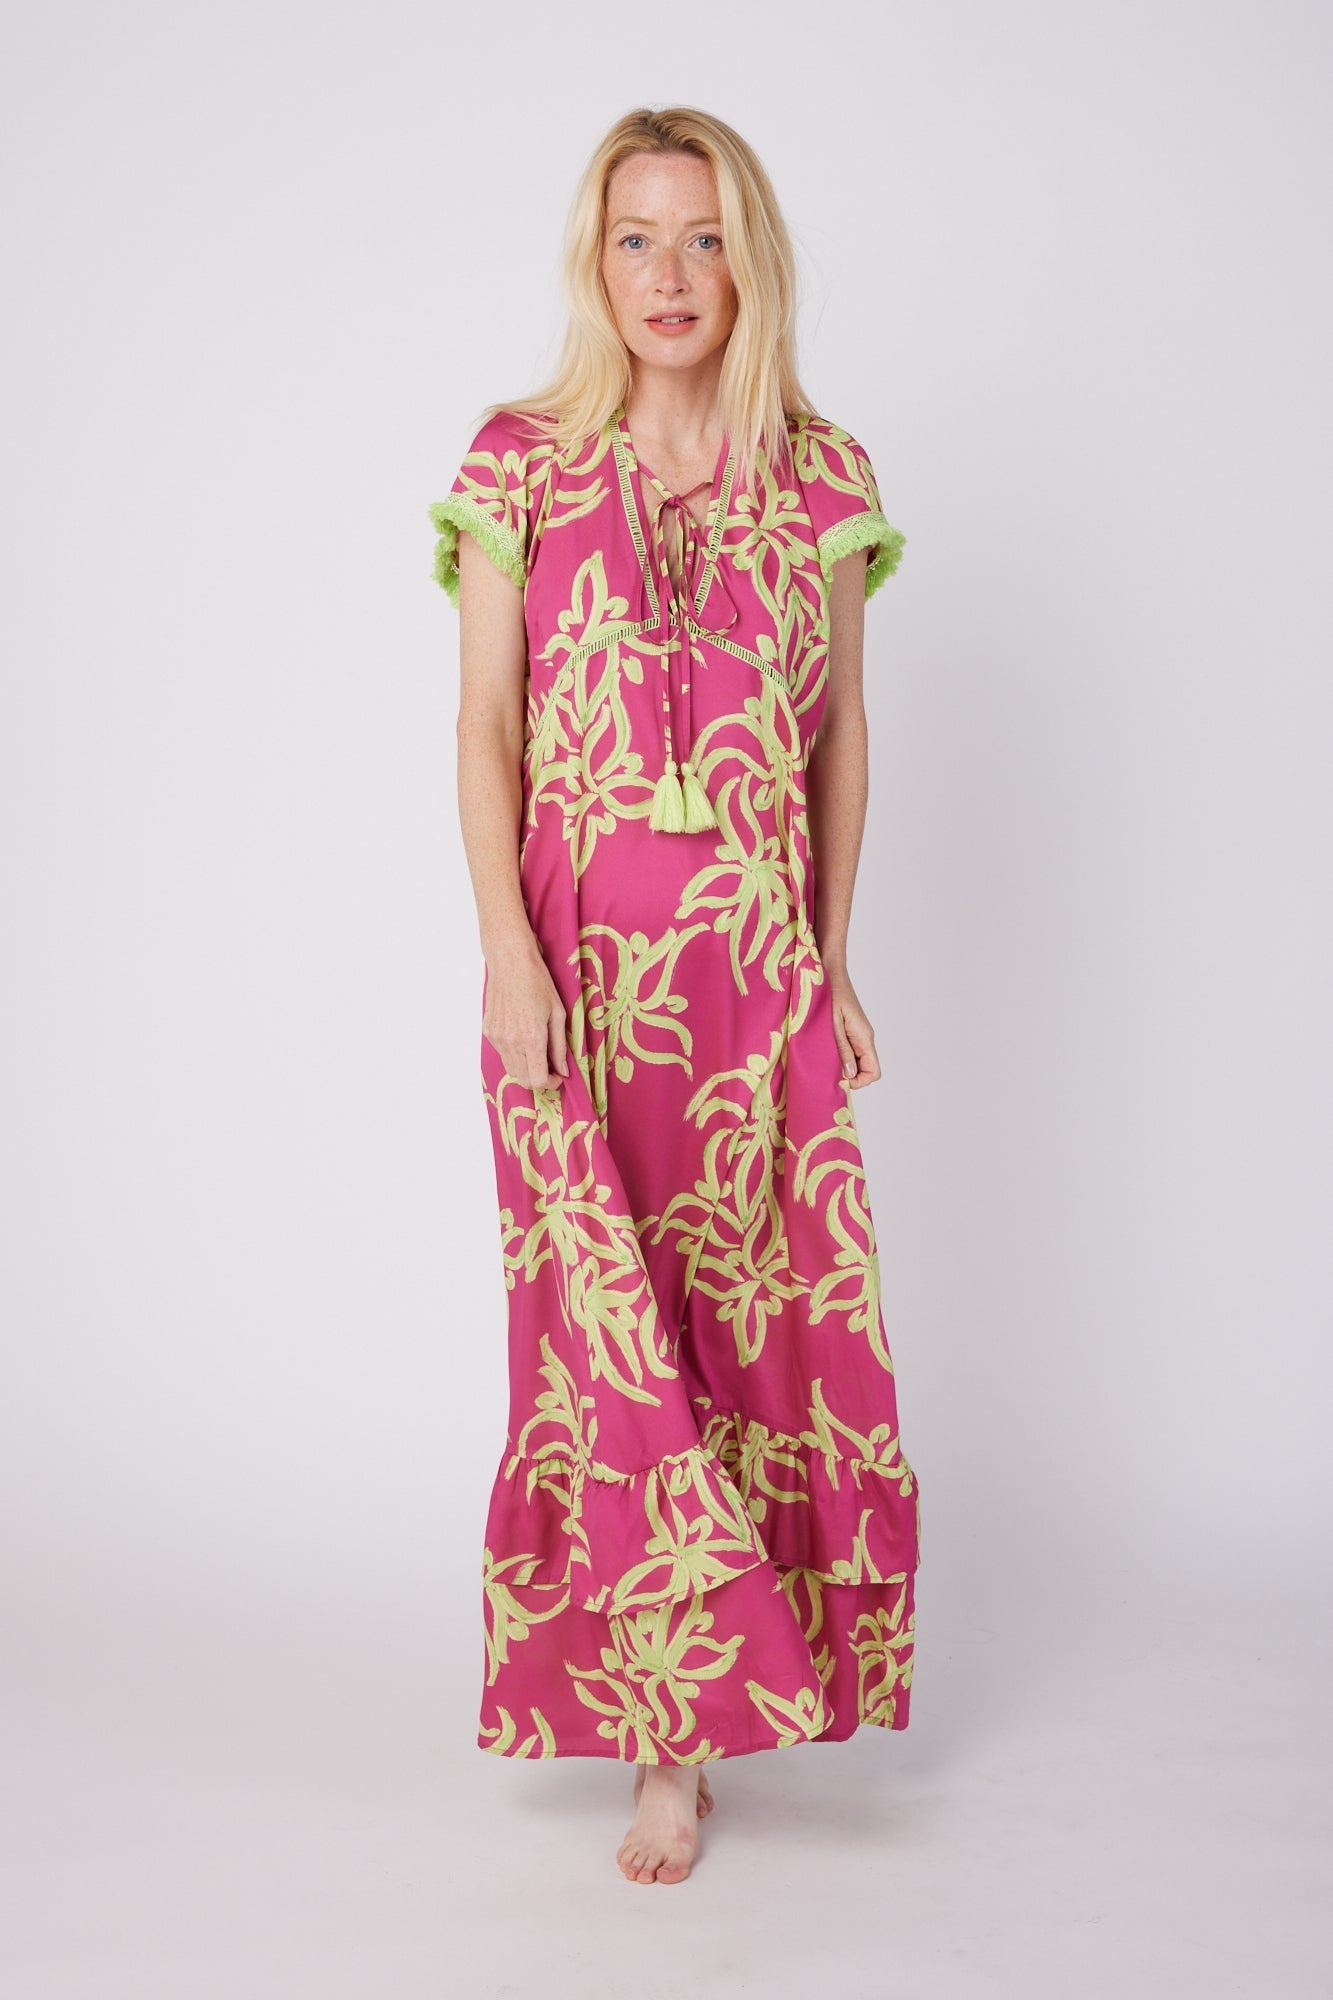 ModaPosa Brigida Short Sleeve V-Neck Maxi Dress with Fringe Trim in in Raspberry Lime Flower . Discover women's resort dresses and lifestyle clothing inspired by the Mediterranean. Free worldwide shipping available!